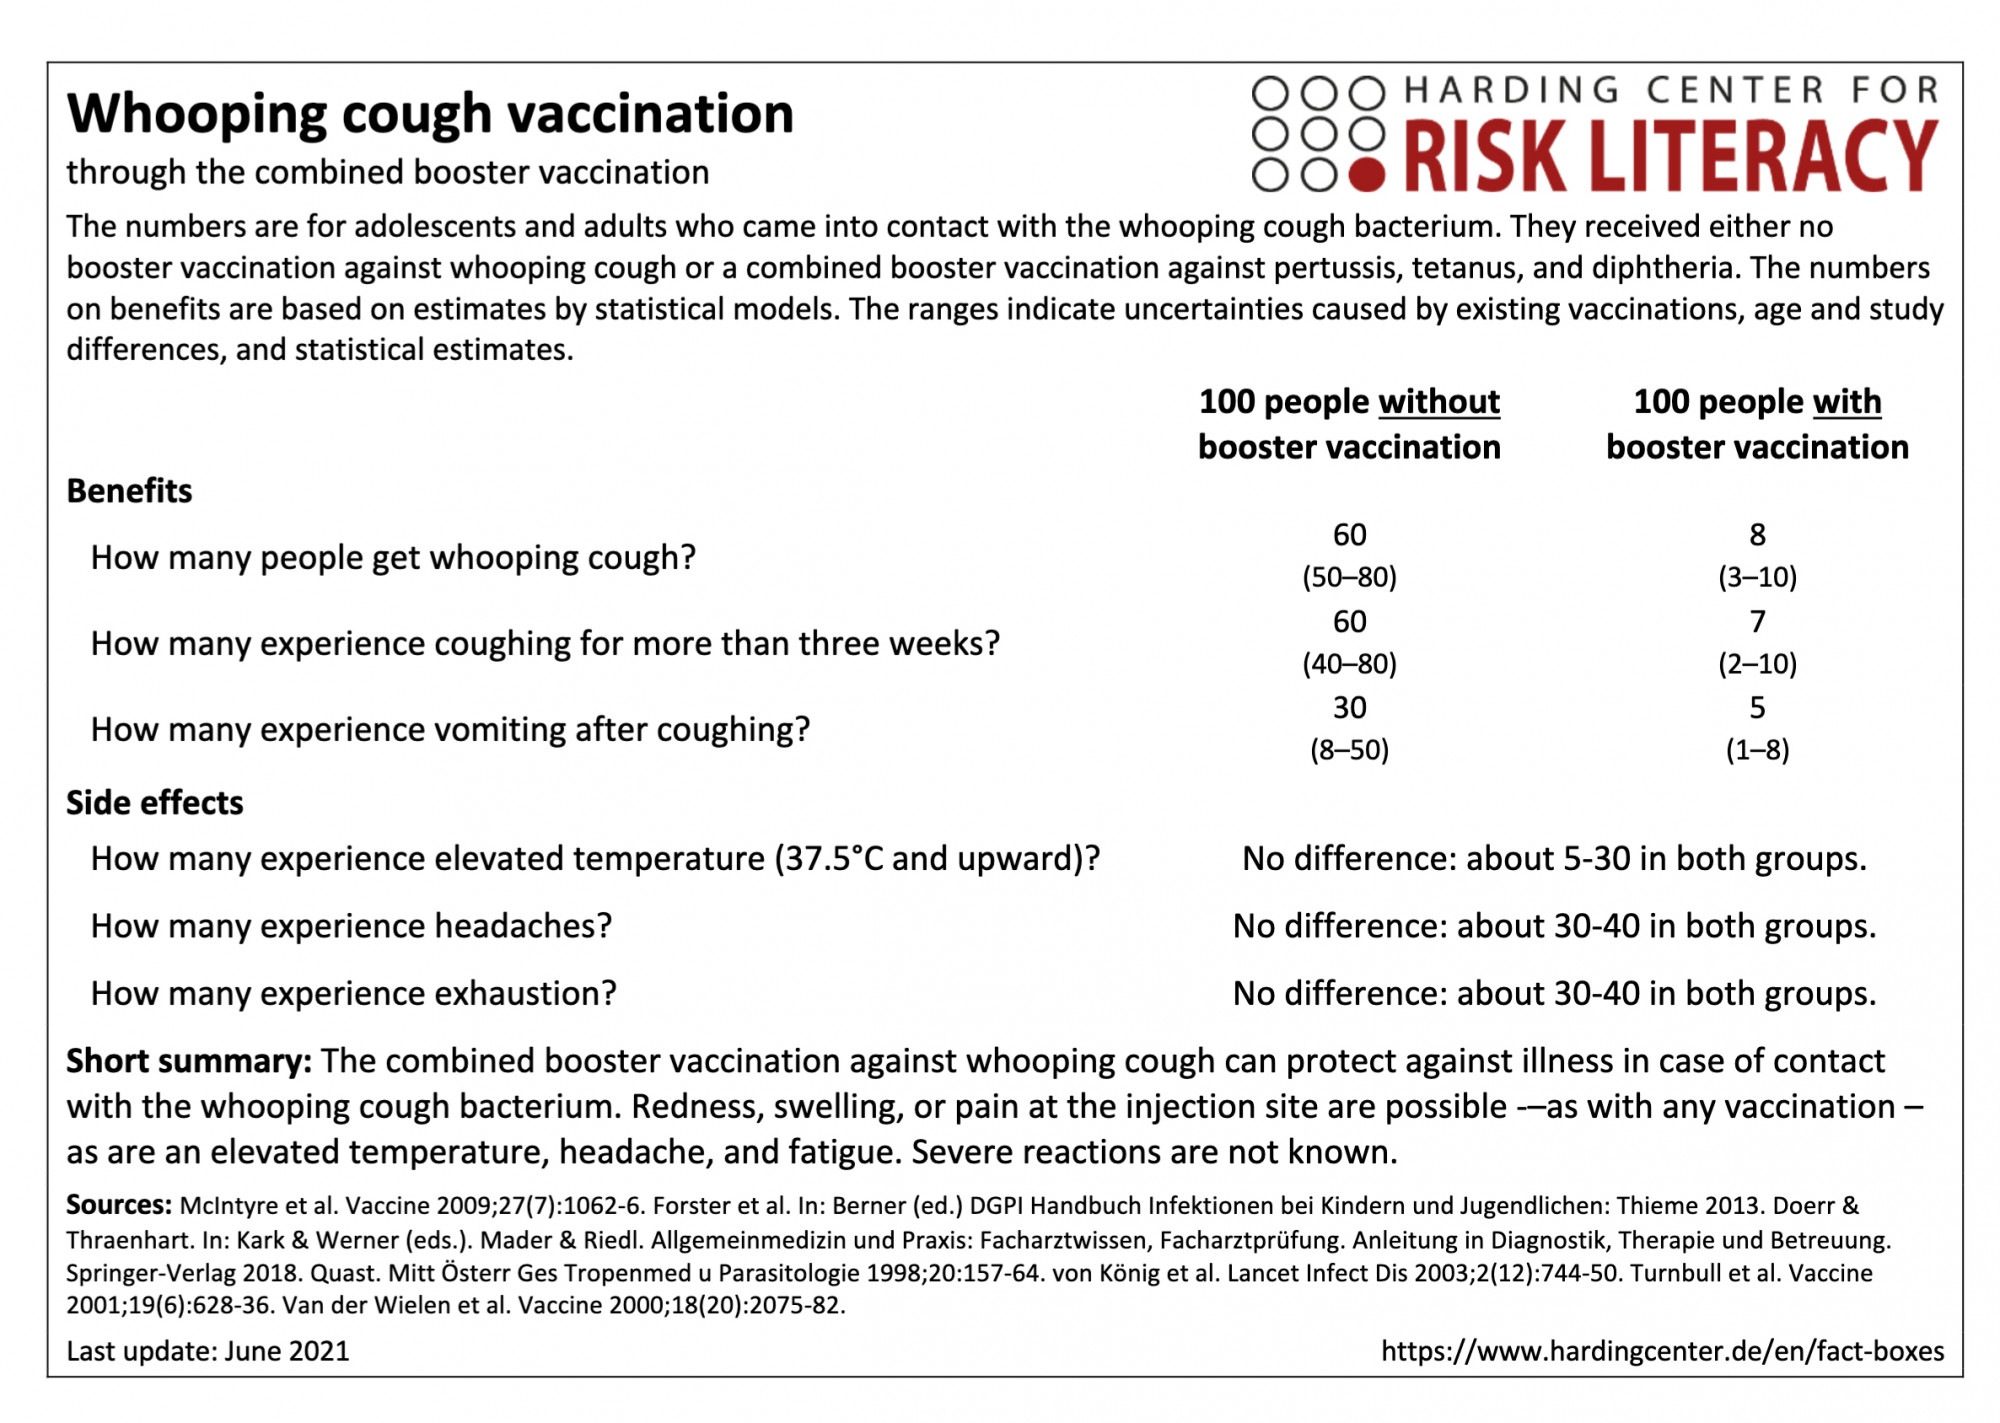 Fact box on whooping cough vaccination through the combined booster